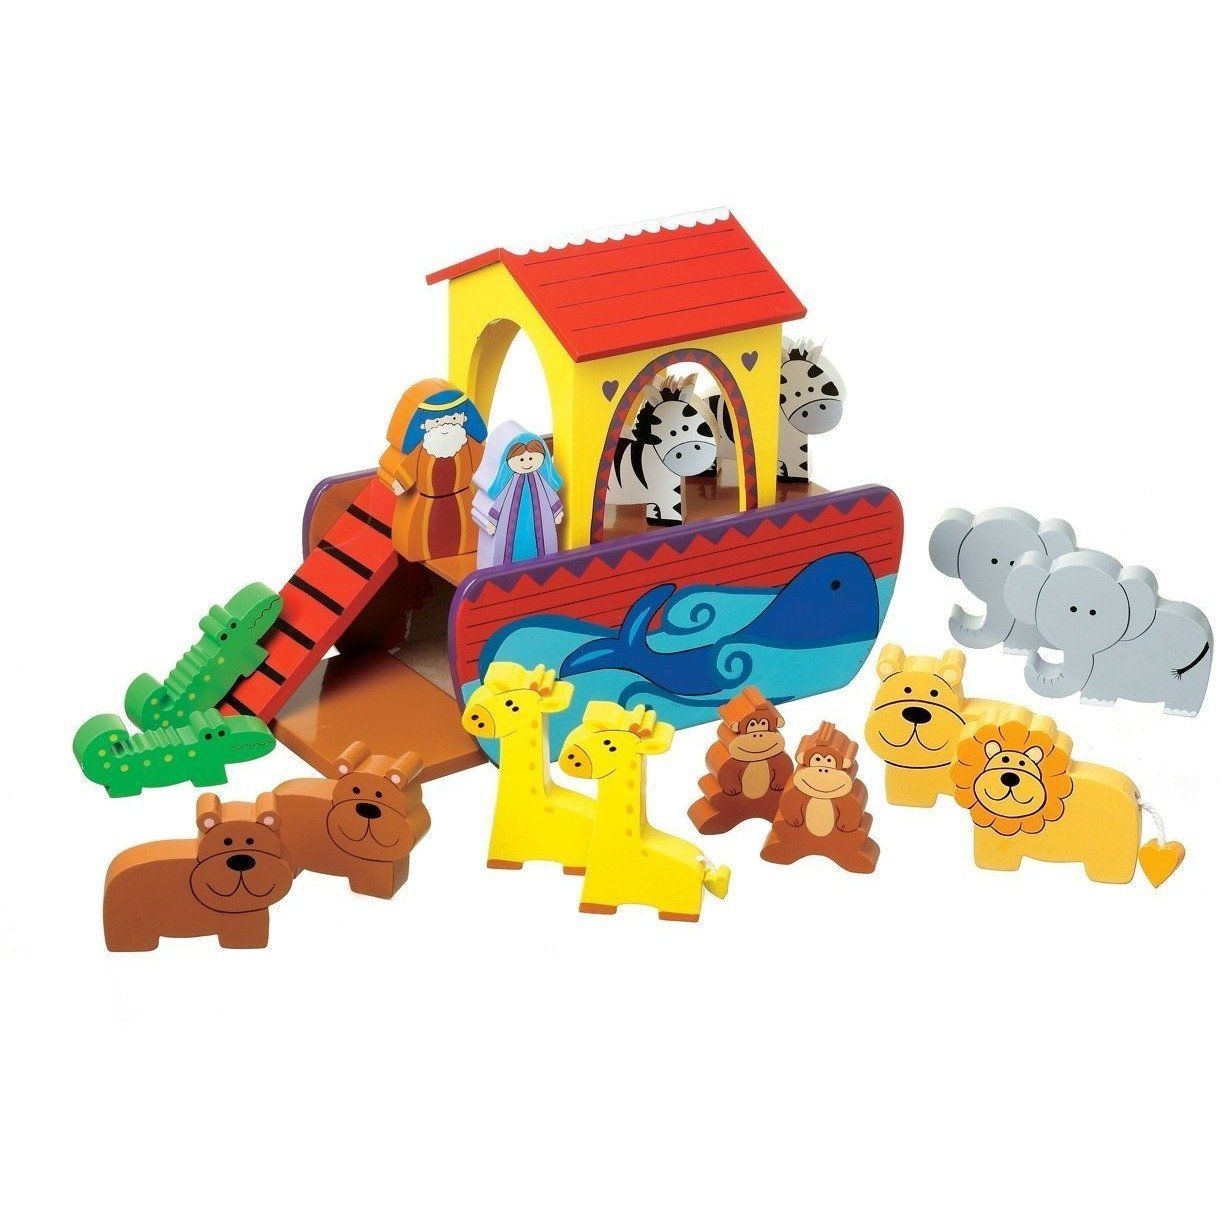 Orange Tree Toys Small Noah's Ark (de madeira) Anne Claire Baby Store 